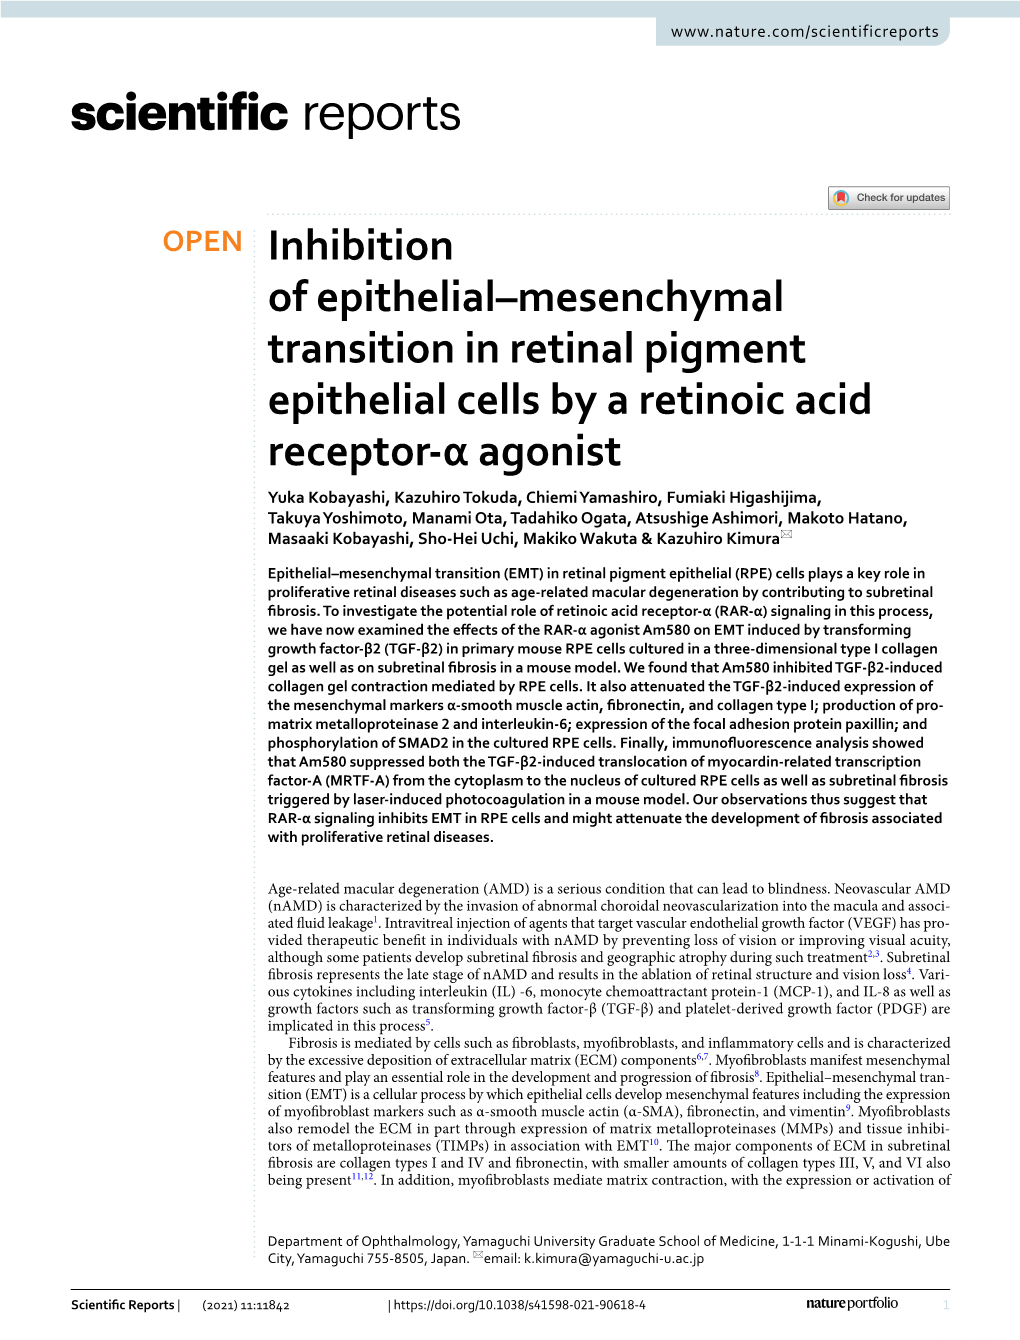 Inhibition of Epithelial–Mesenchymal Transition in Retinal Pigment